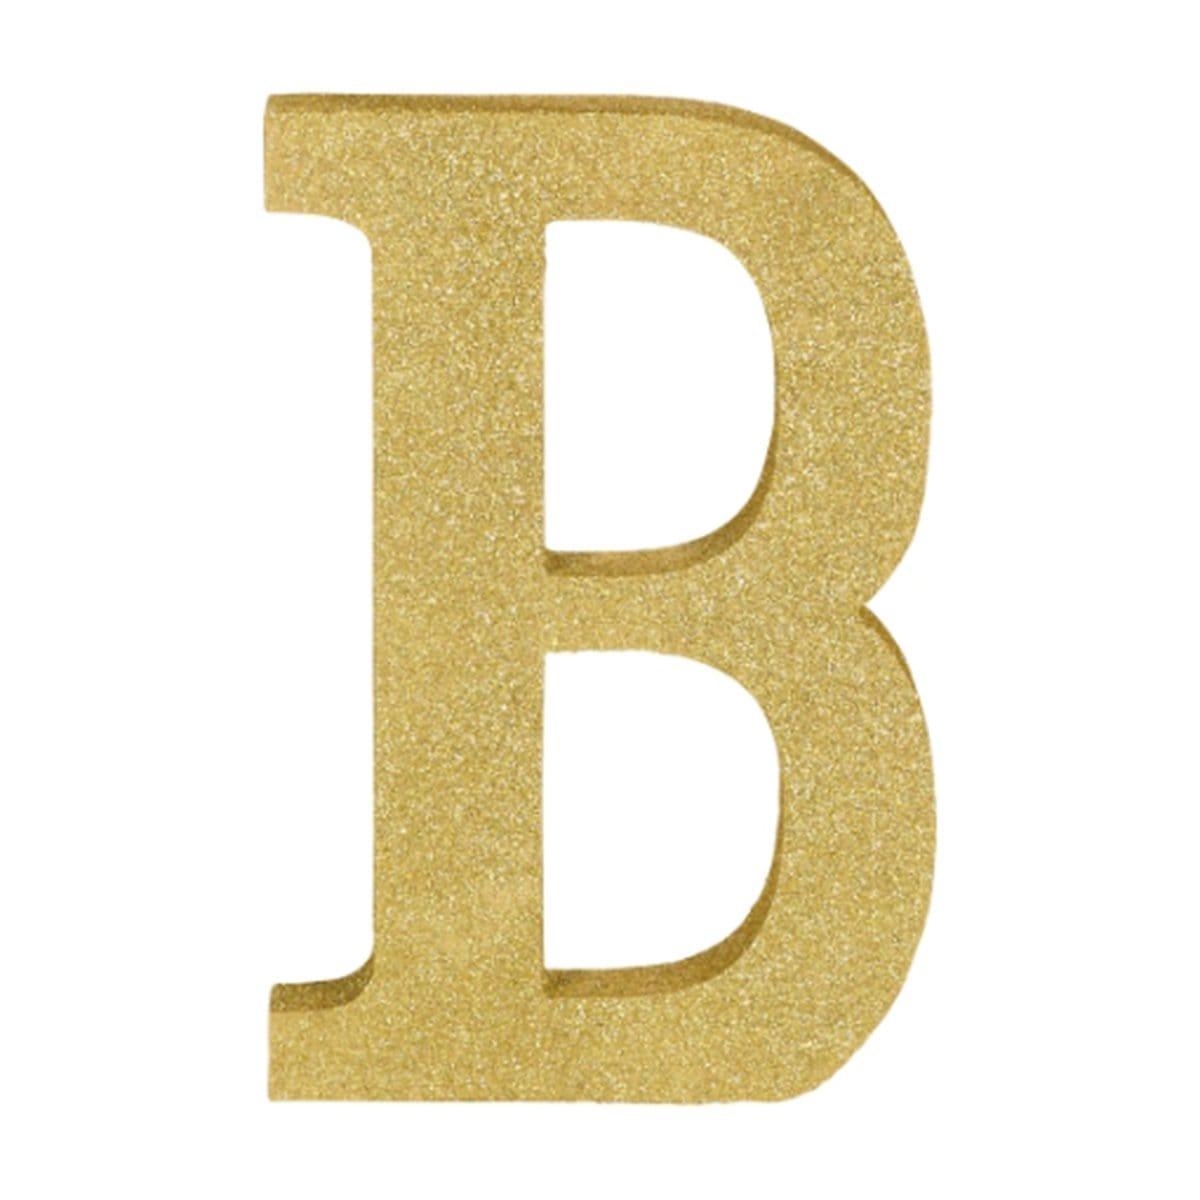 Buy Decorations Gold Glitter Letter - B sold at Party Expert